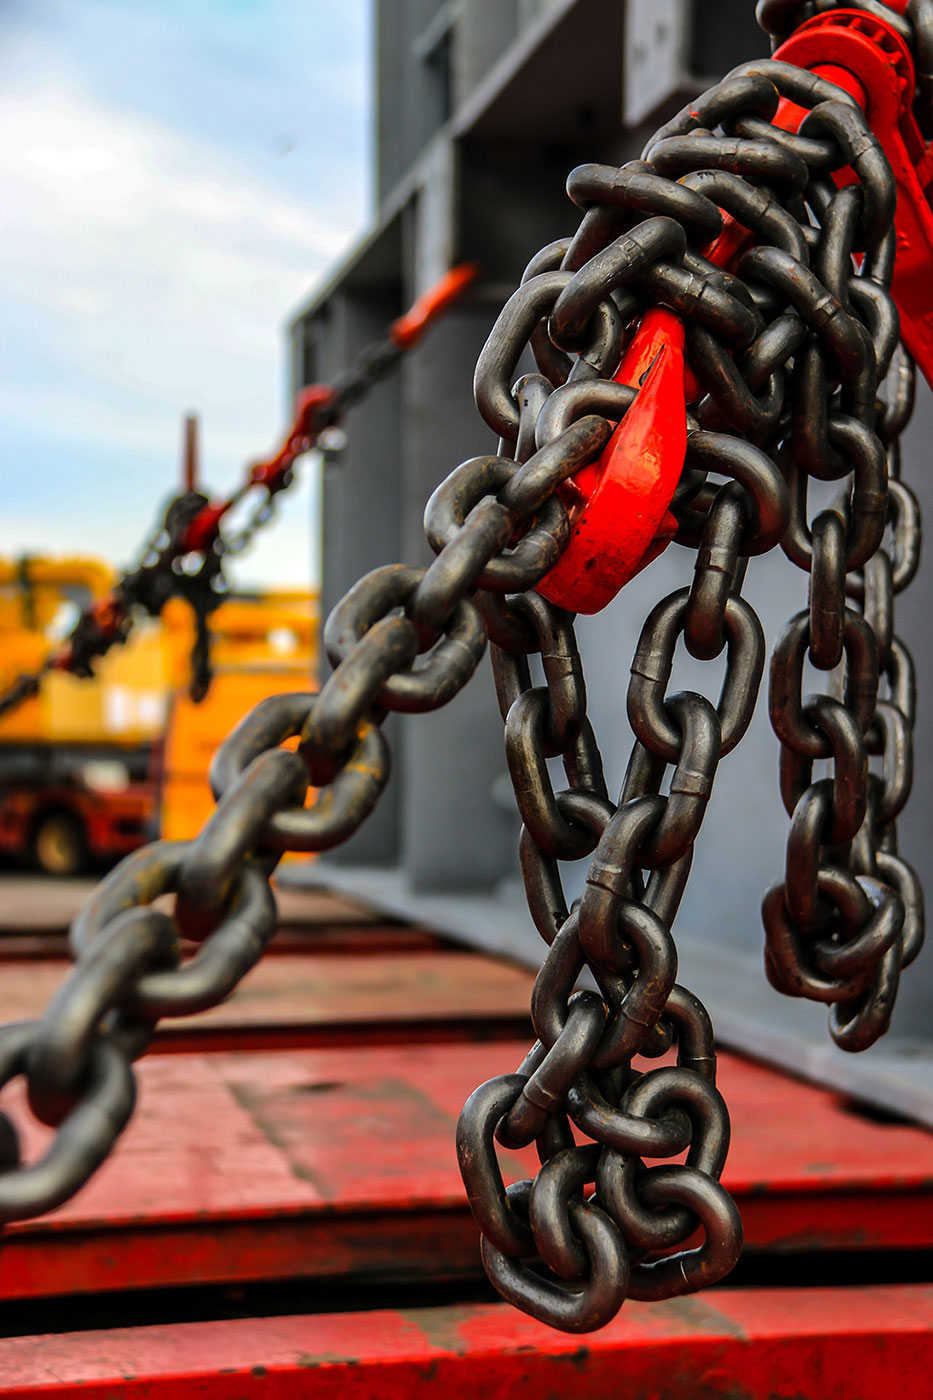 Chains to keep boats in place